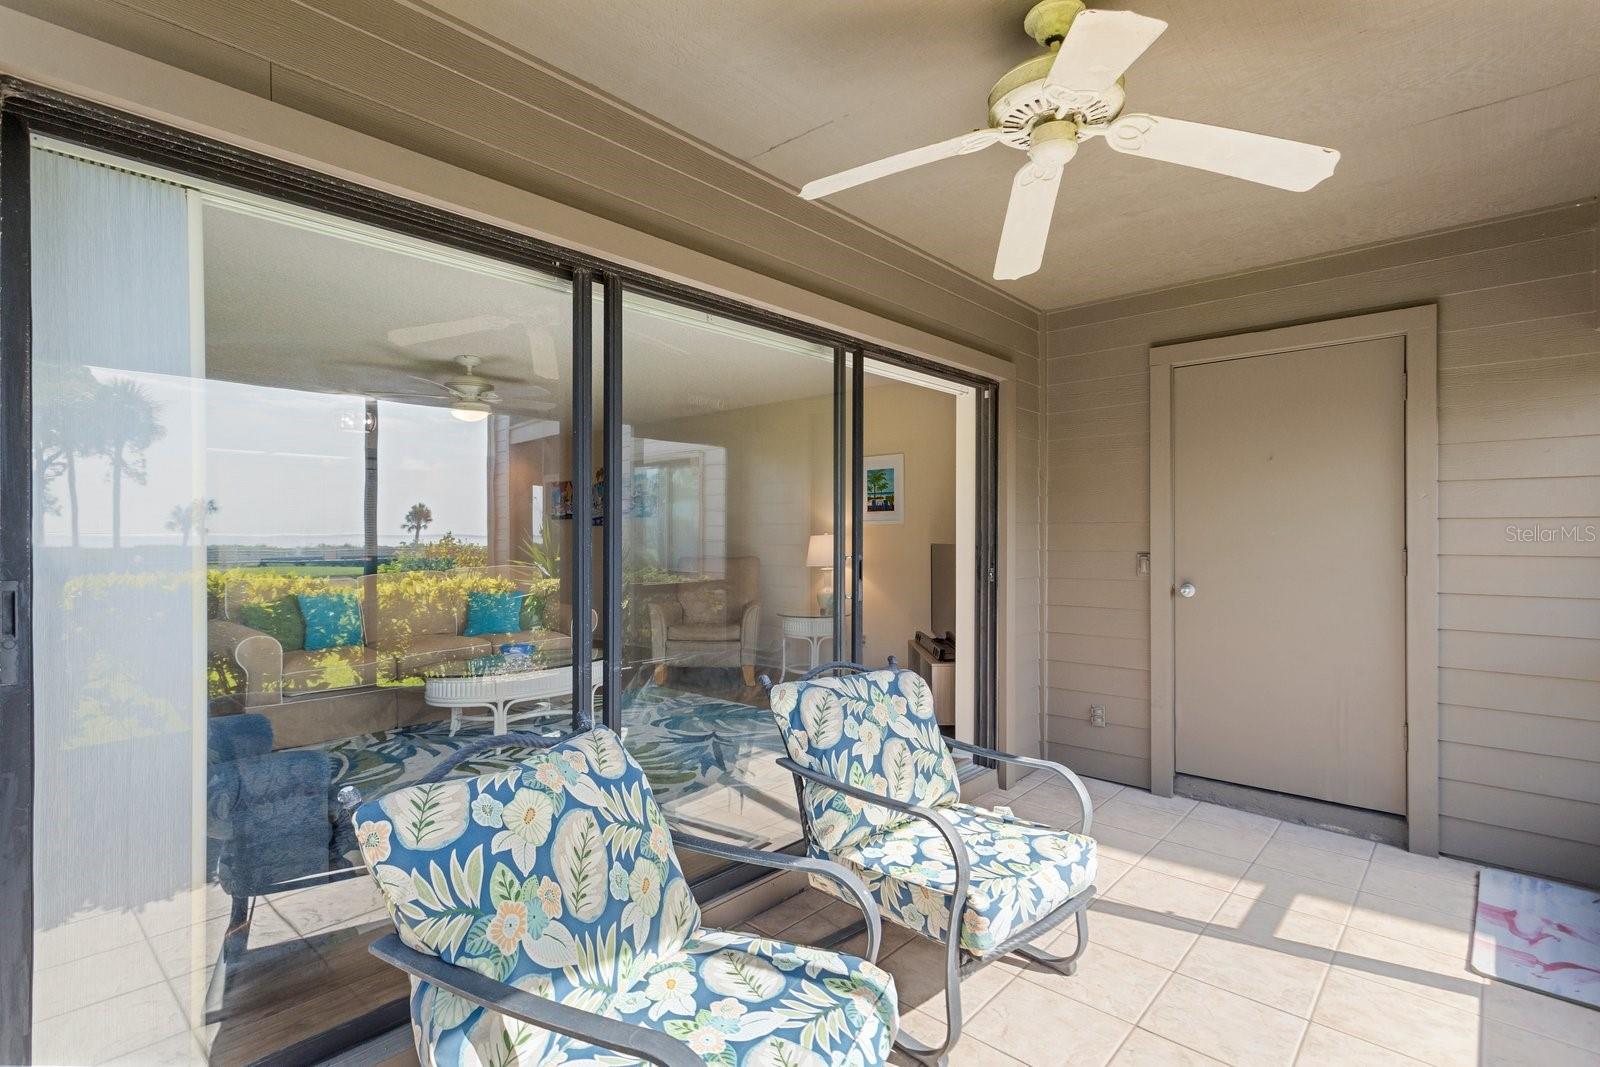 Stay cool on the patio with the overhead fan.